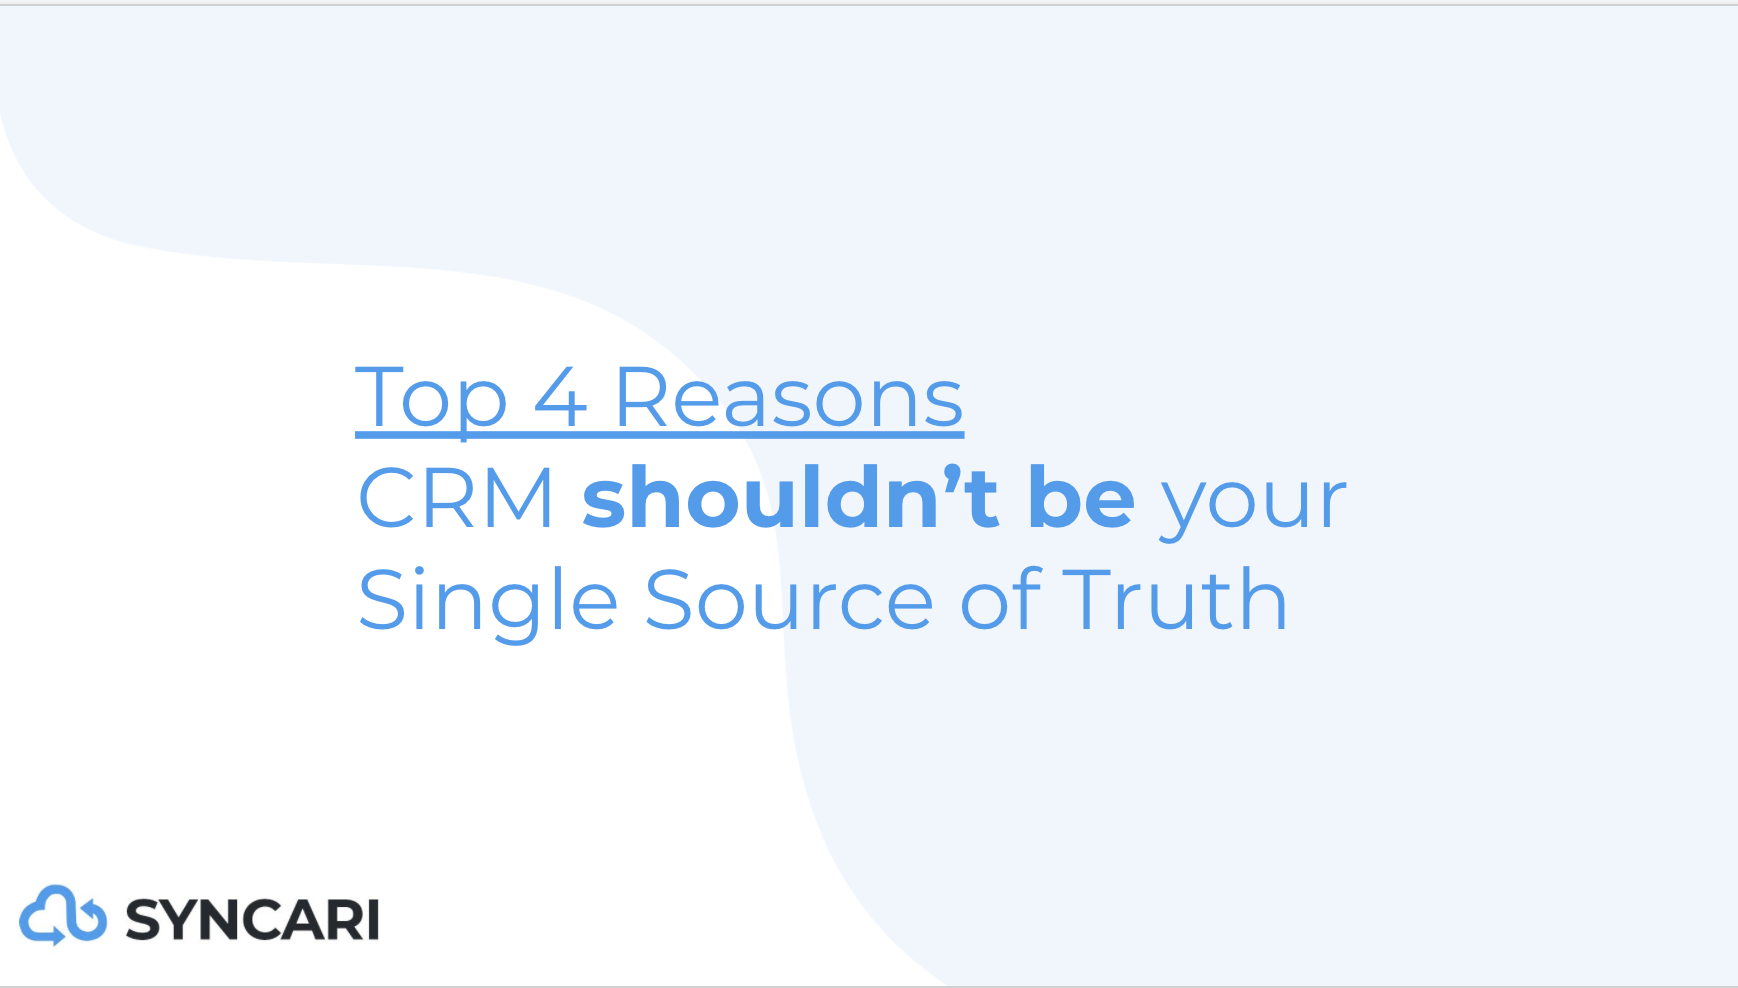 CRM not a single source of truth